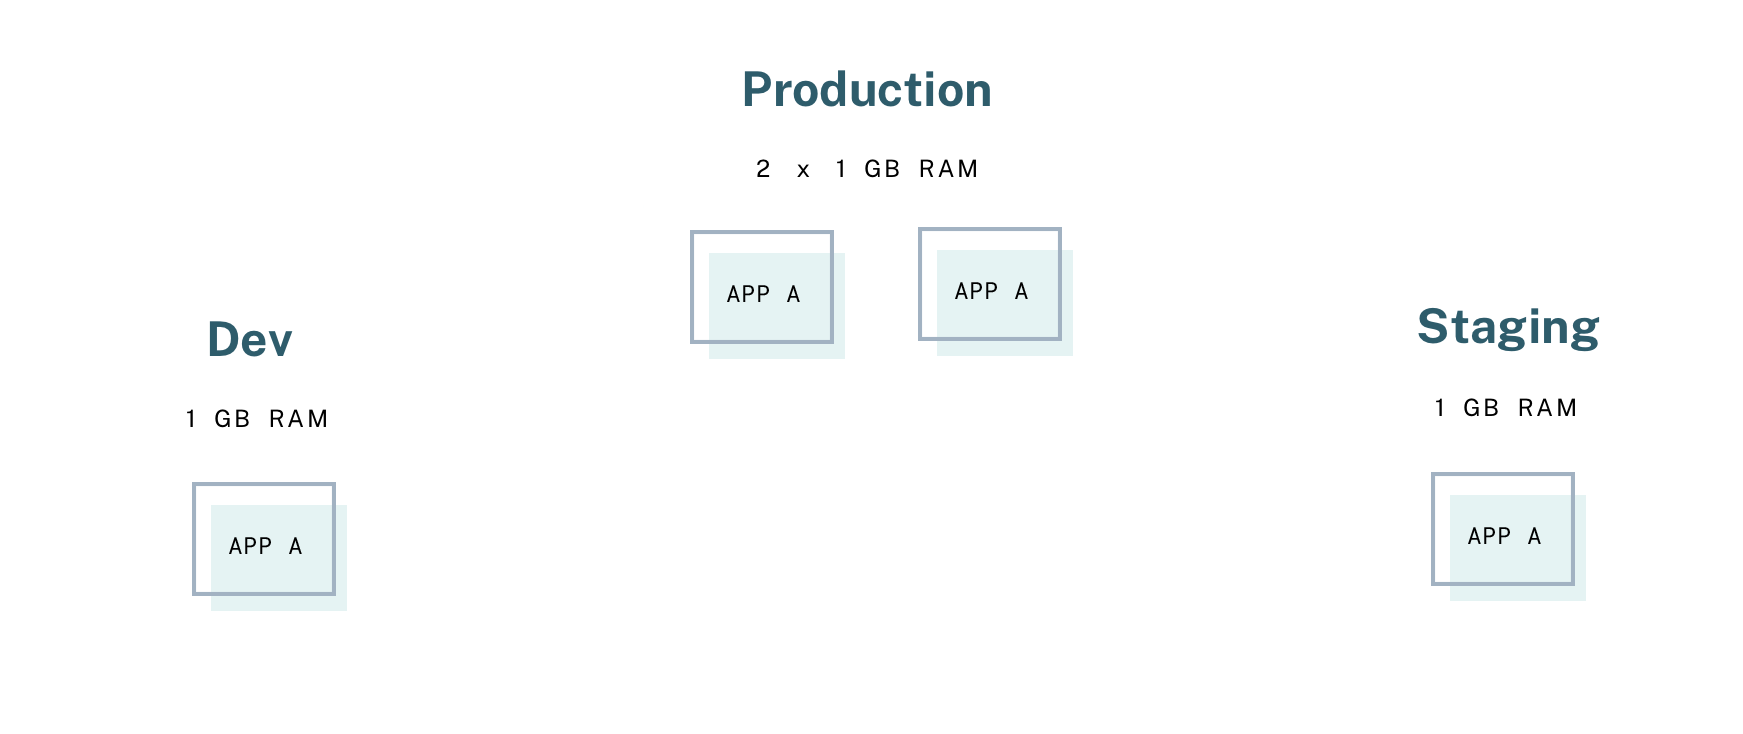 Illustration of sample app running in dev, staging, and production environments